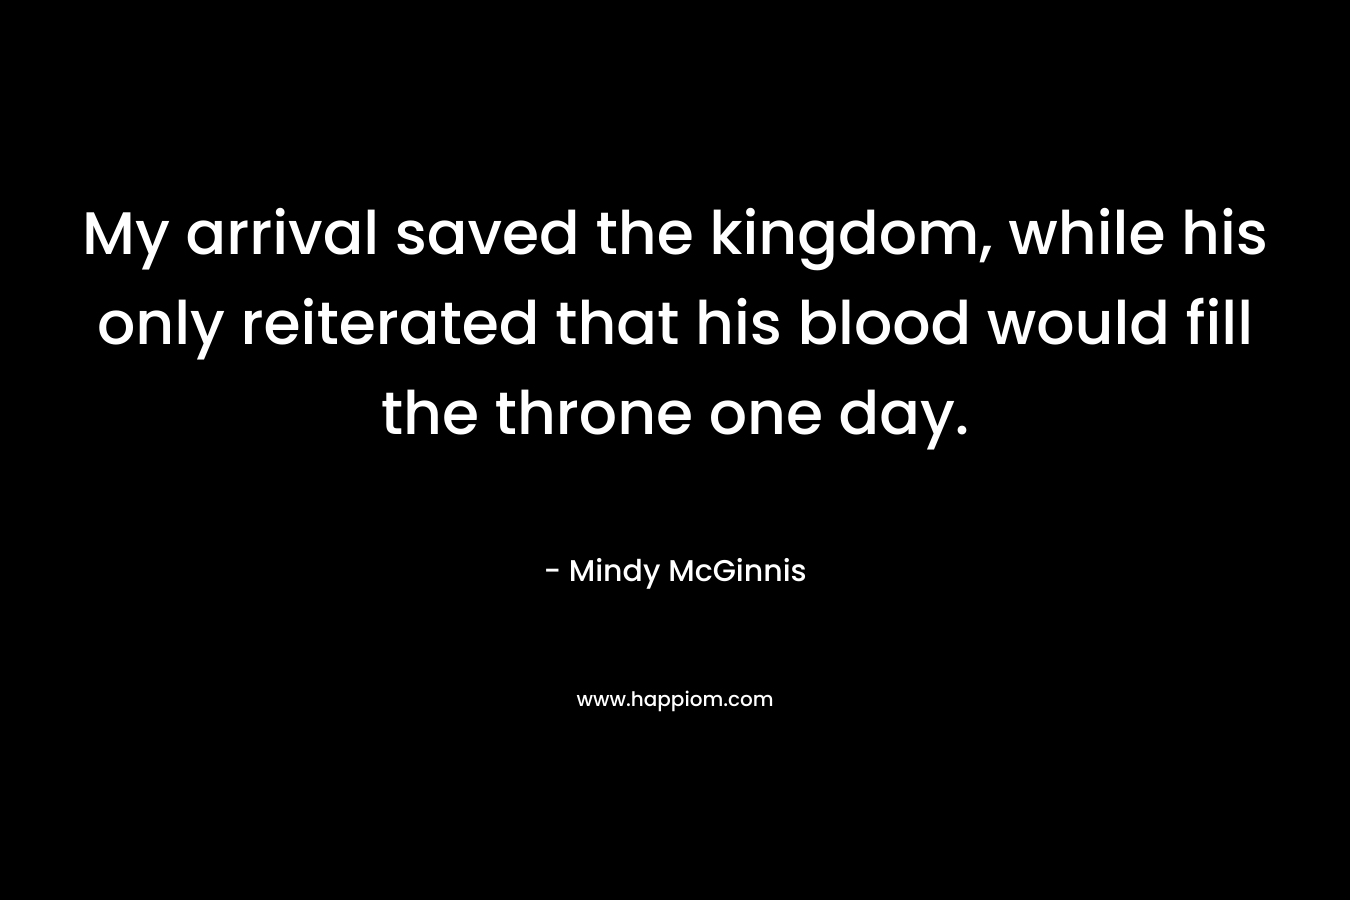 My arrival saved the kingdom, while his only reiterated that his blood would fill the throne one day.